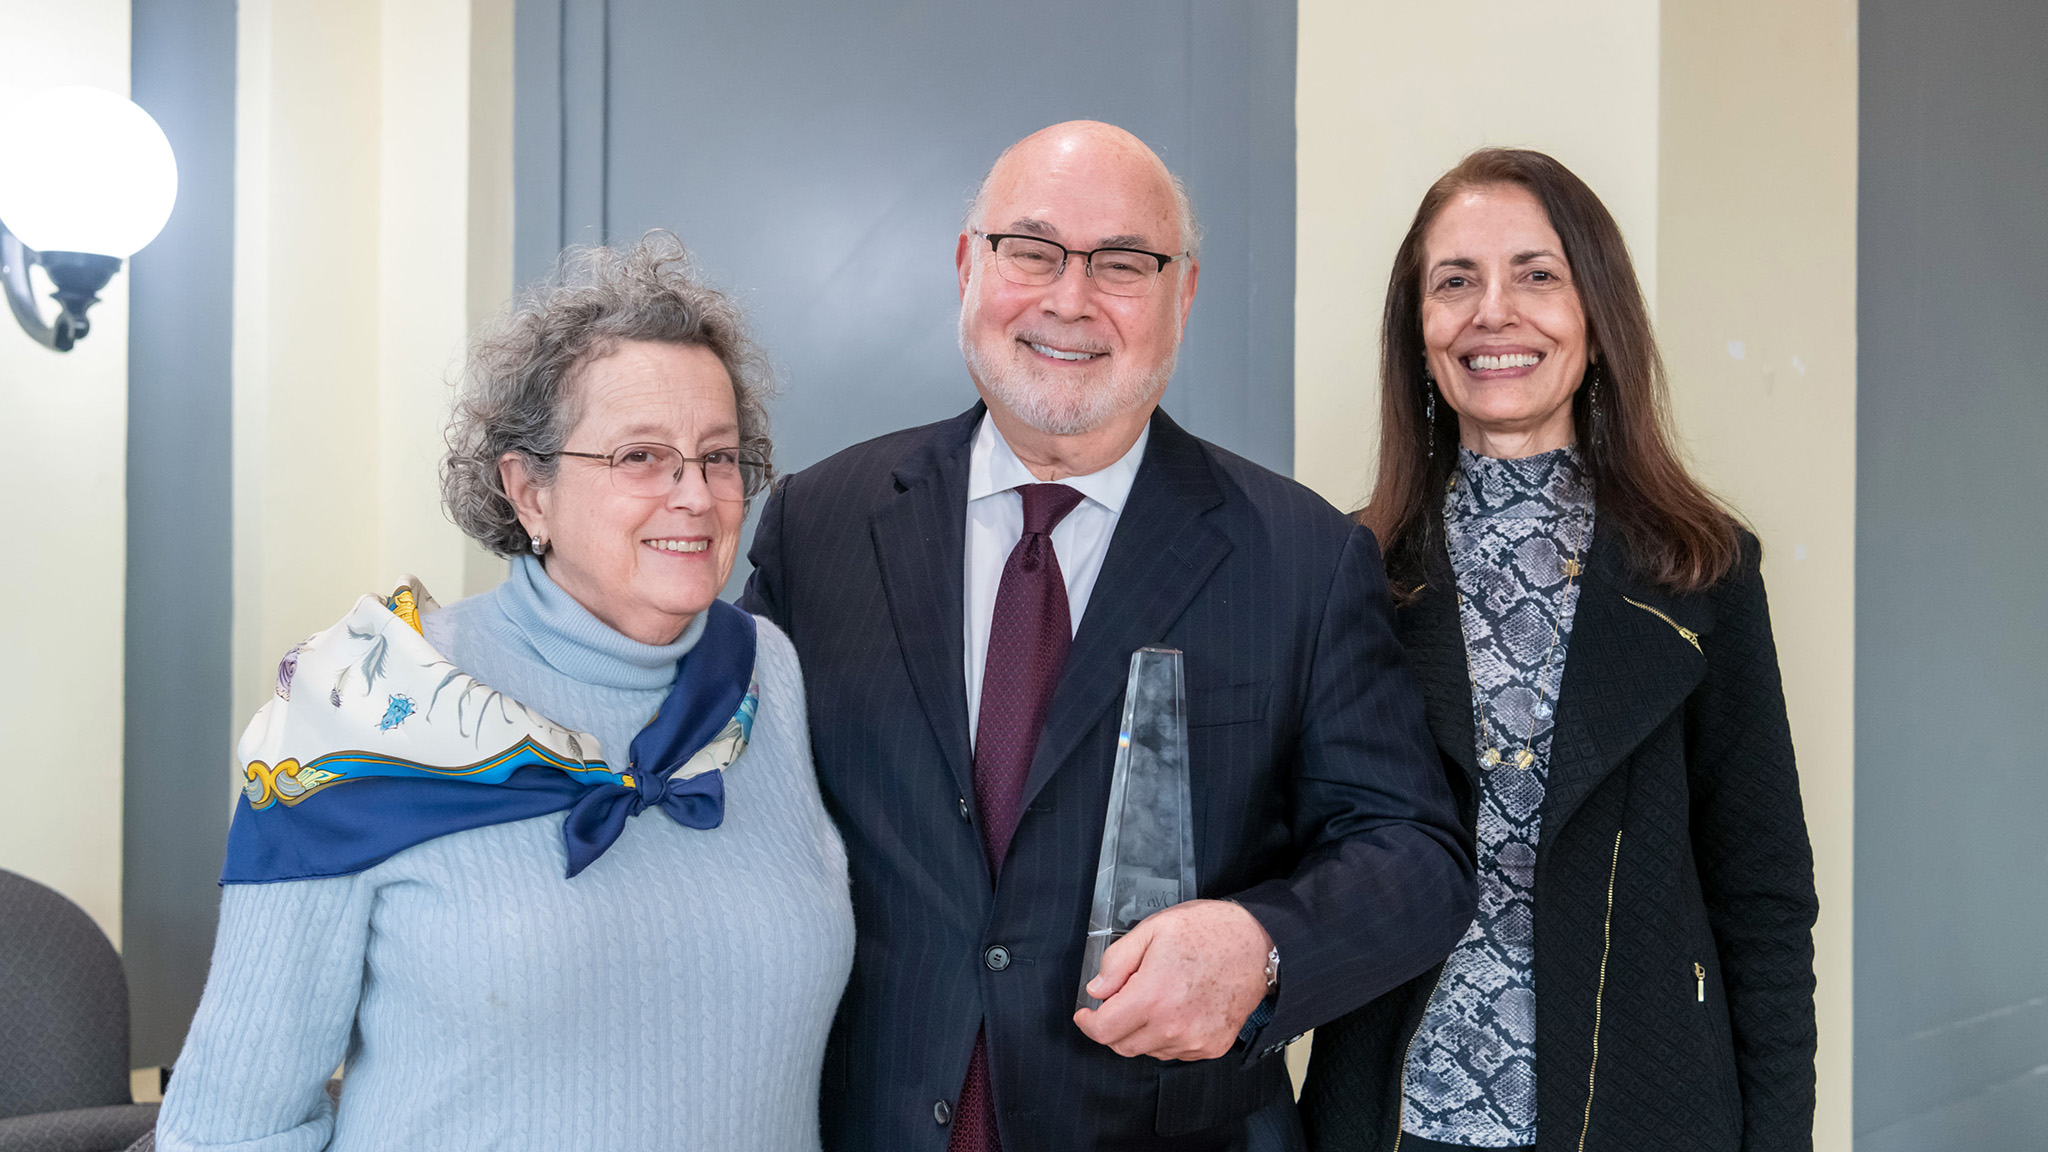 Jonathan Granoff ’70 receives Distinguished Service Award from (left) Amy Pullman ’71, Chair of the AAVC Selection Committee, and AAVC President Monica Vachher ’77.